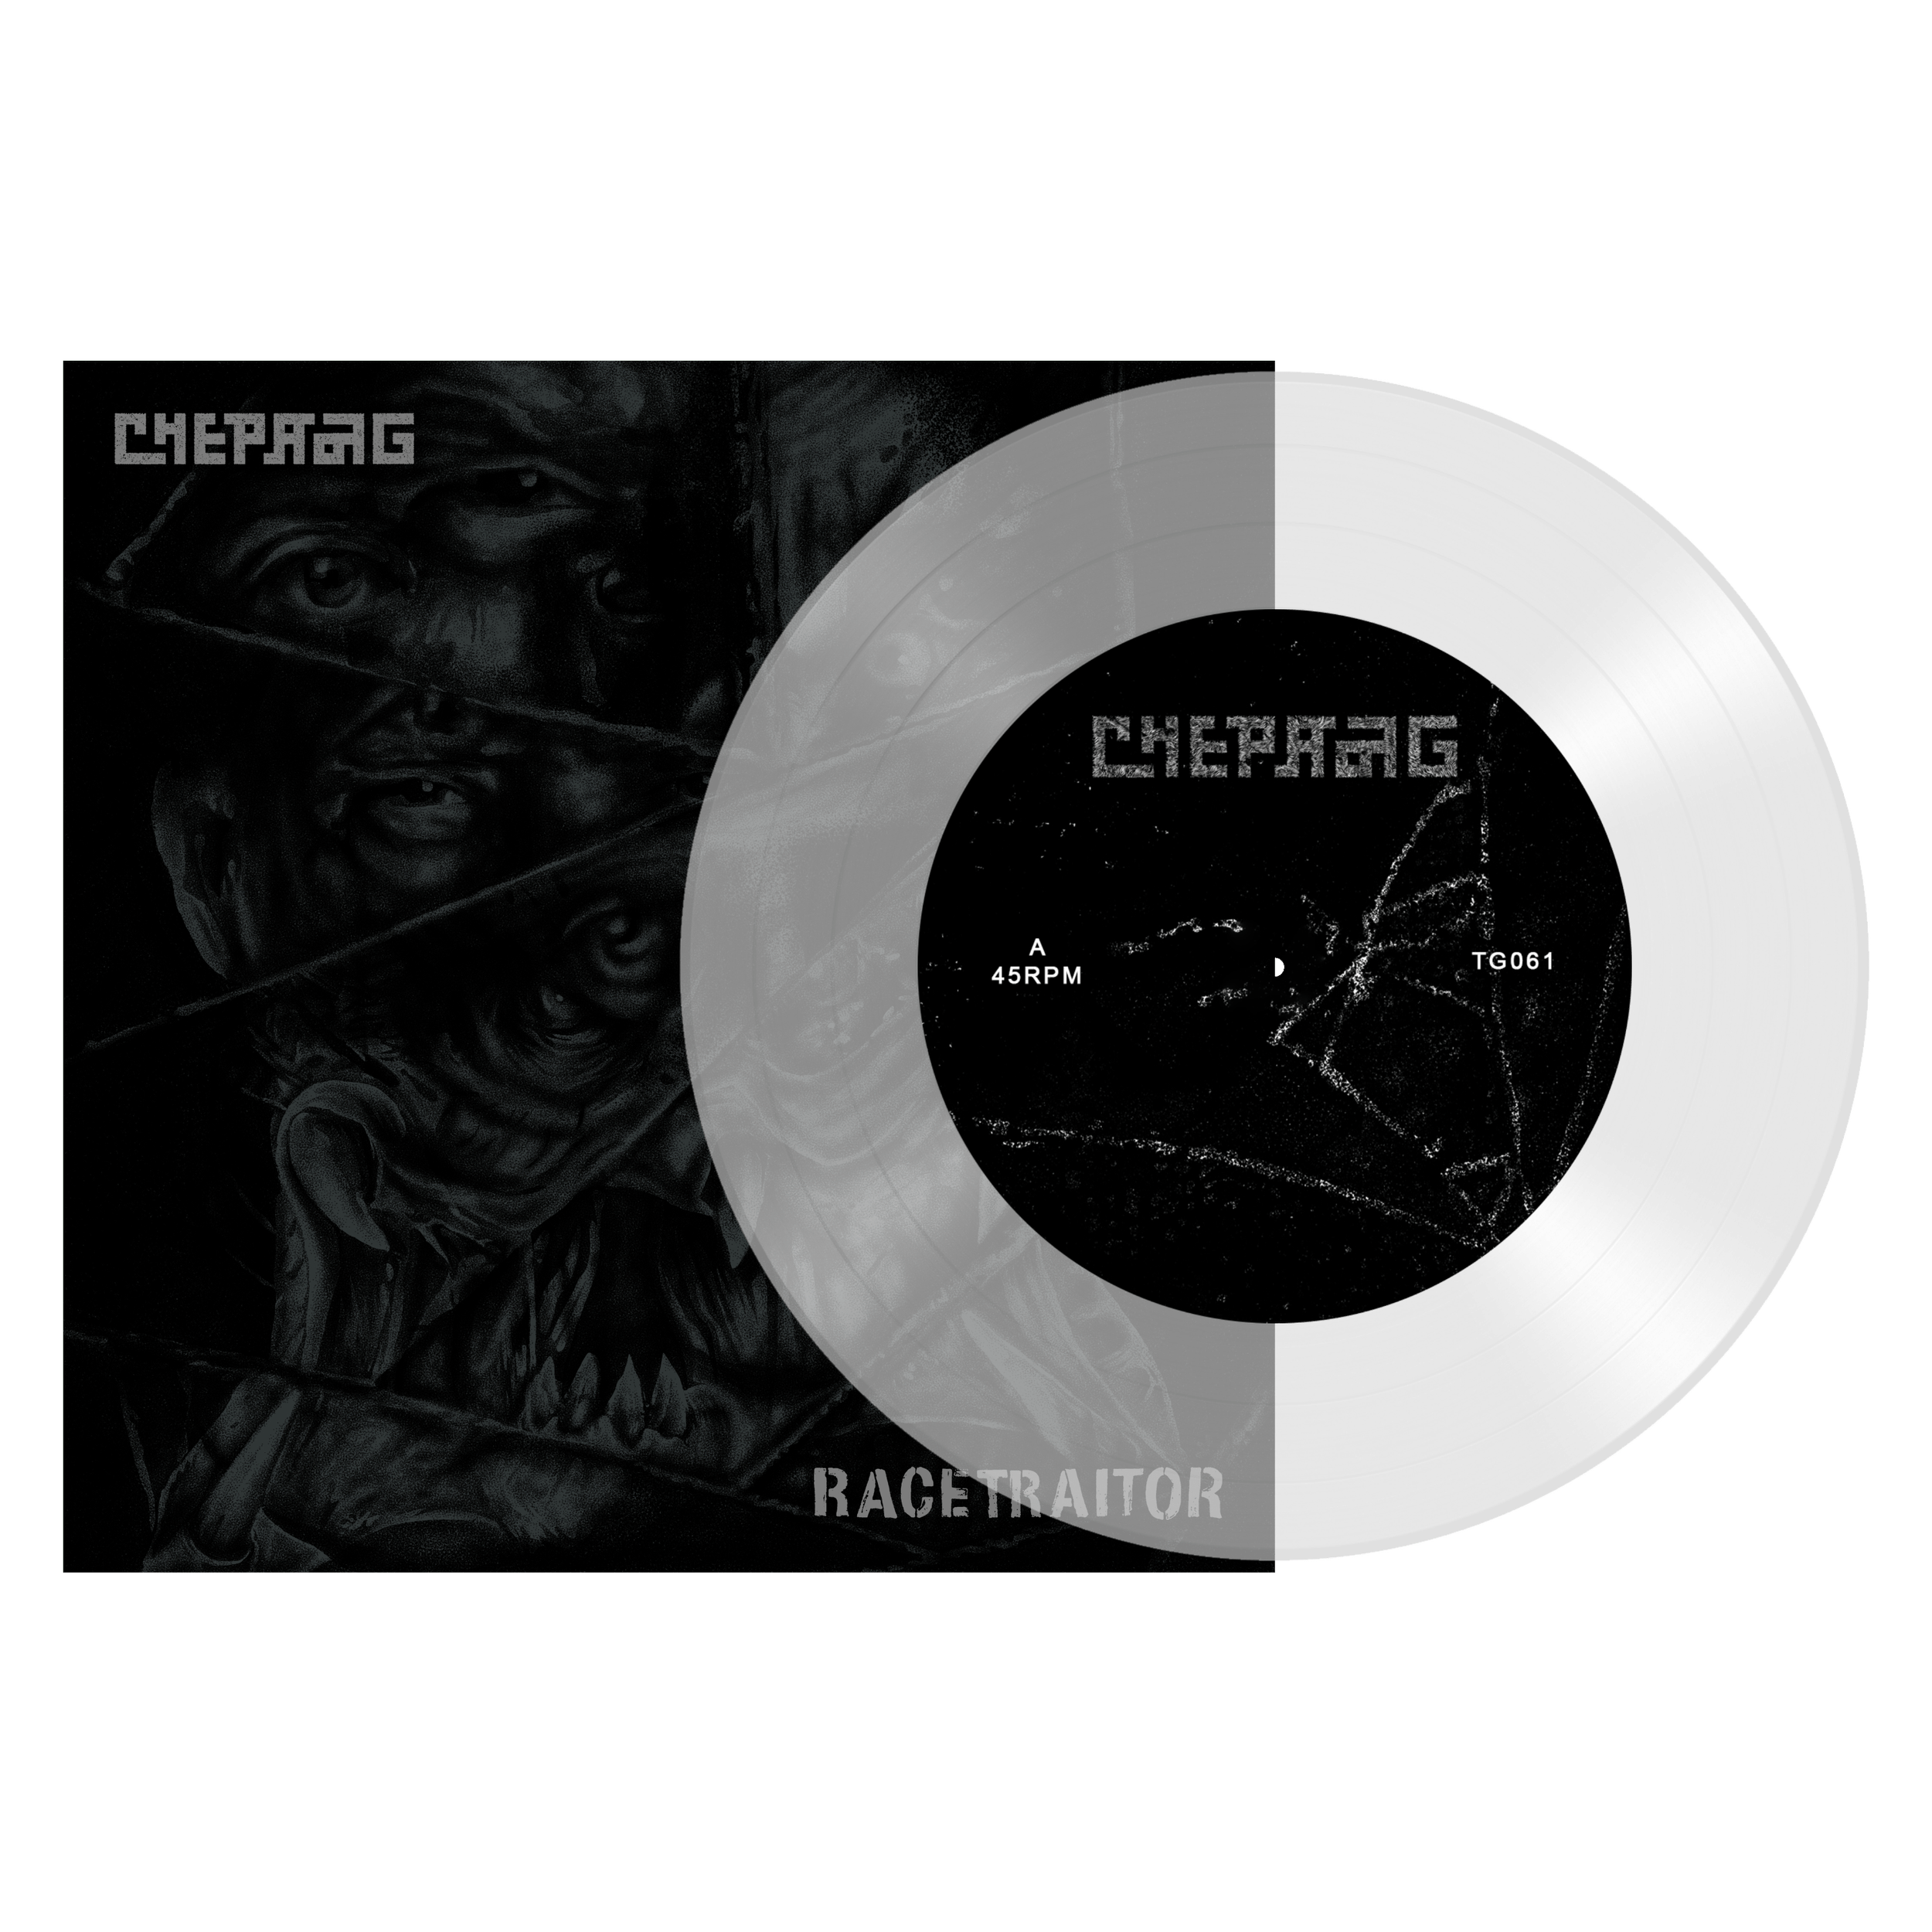 Chepang_Racetraitor - Vinyl with Cover - Clear.png